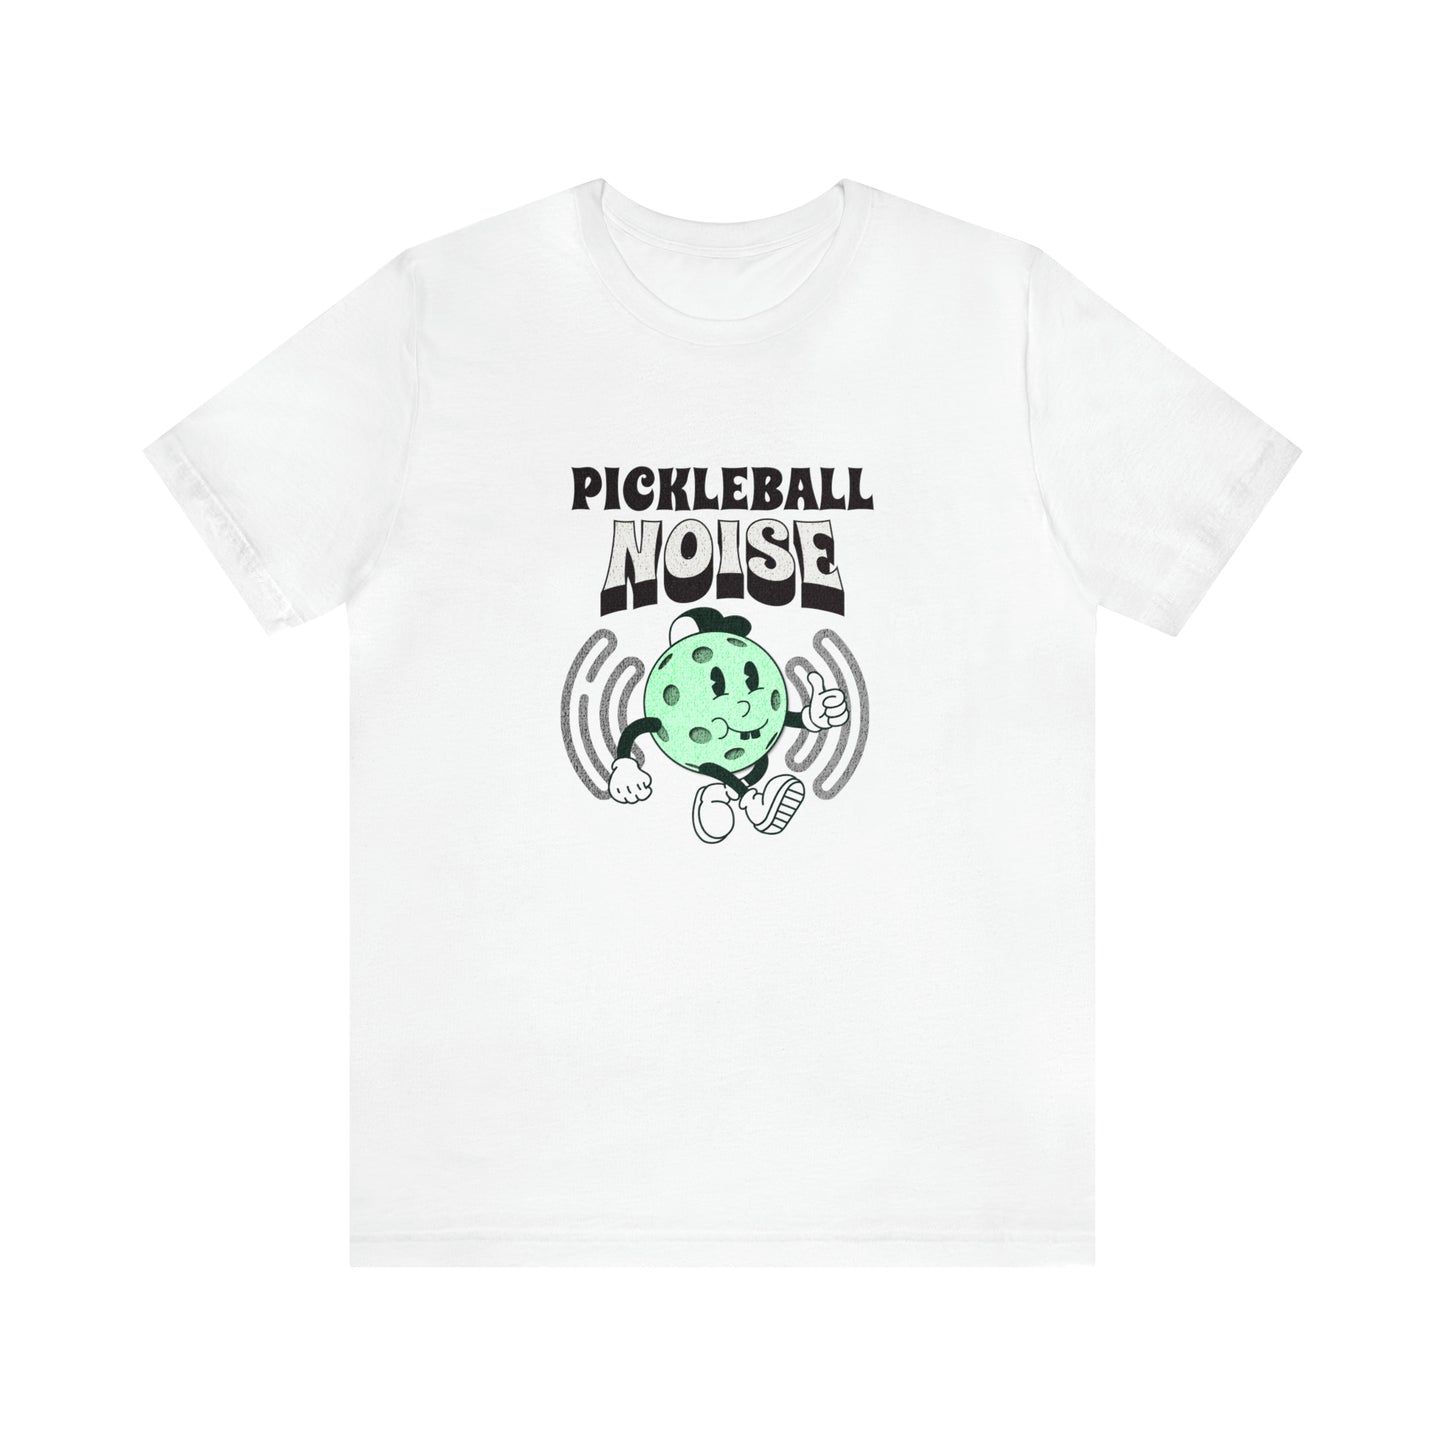 Pickleball Noise: Embrace the Sounds